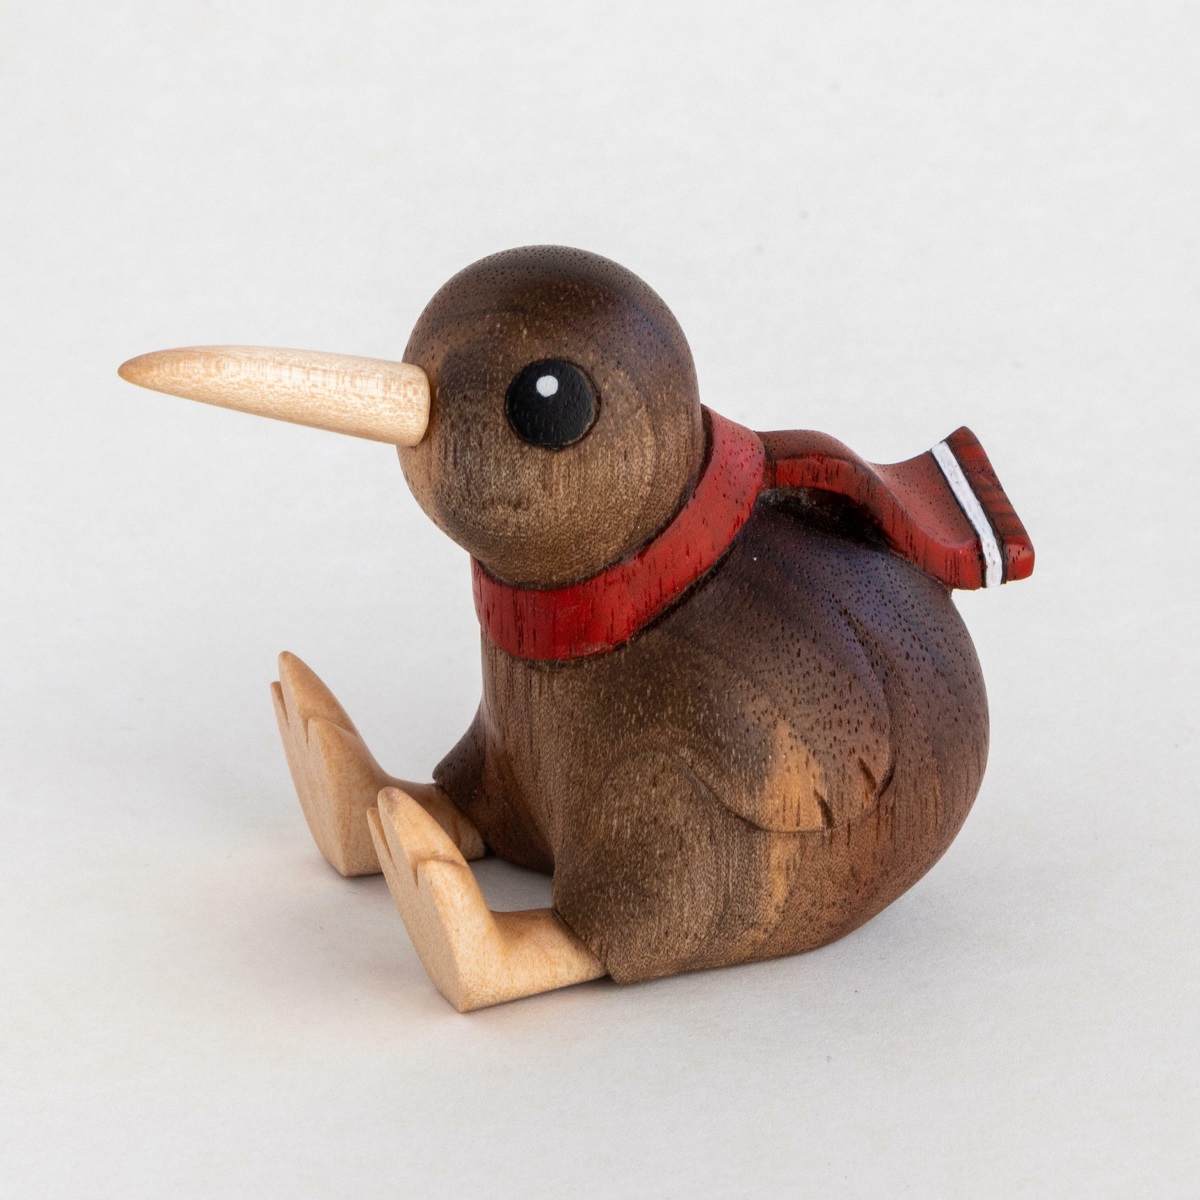 I Carved A Kiwi, His Name Is Fred, And He Dreams Of Flying (Walnut And Maple)